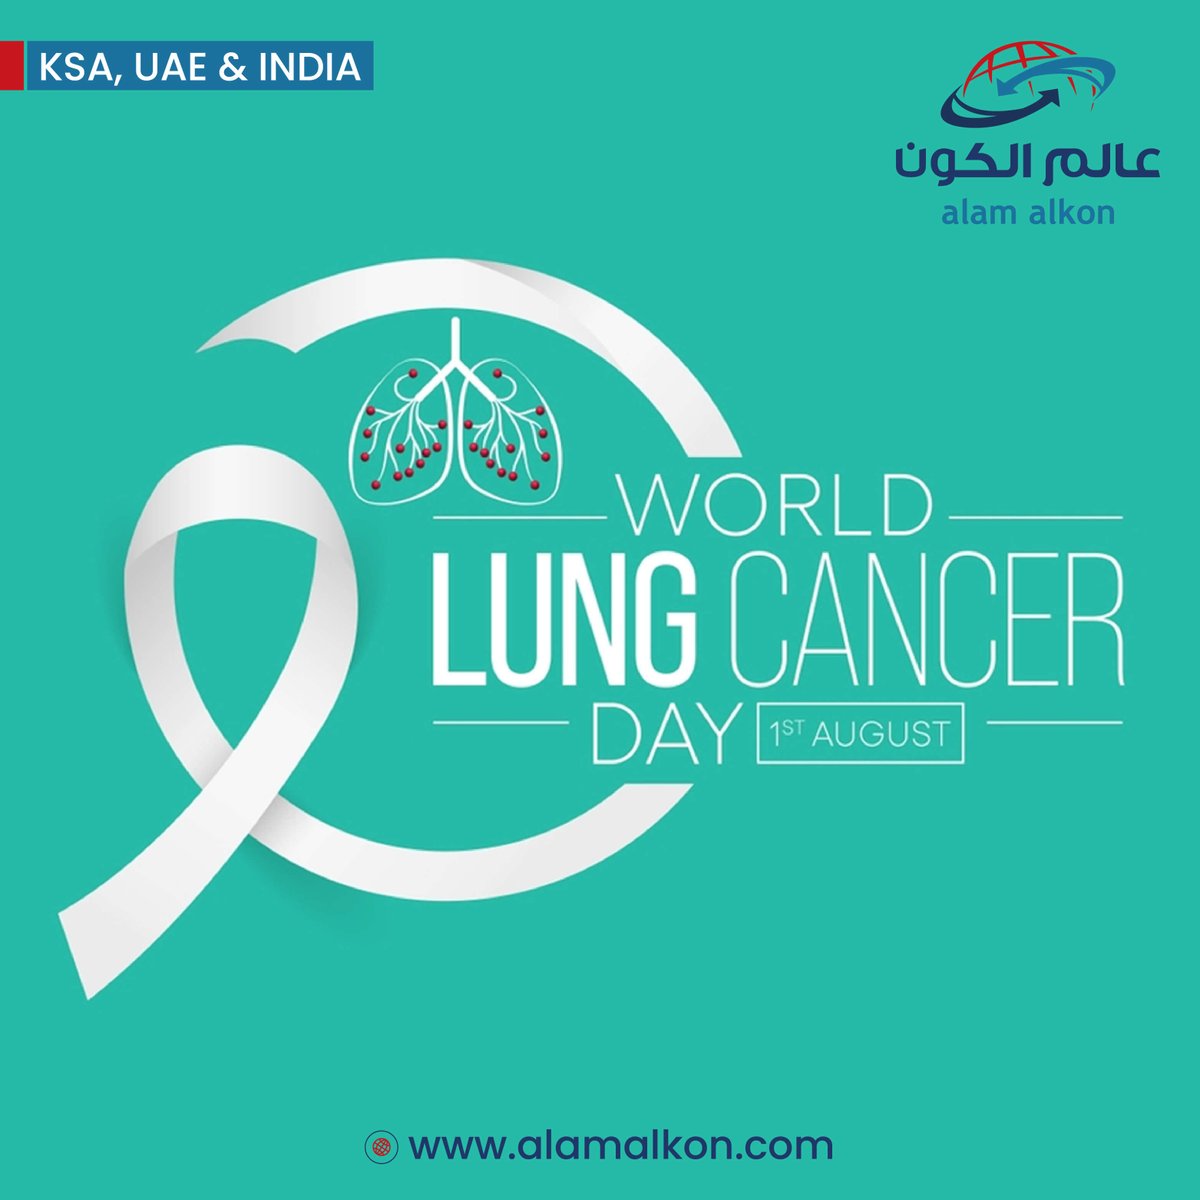 Today is World Lung Cancer Day, a day to raise awareness about lung cancer prevention, early detection, and treatment options. Let's come together to support lung cancer patients, spread knowledge, and advocate for a smoke-free world. #WorldLungCancerDay #LungCancerAwareness